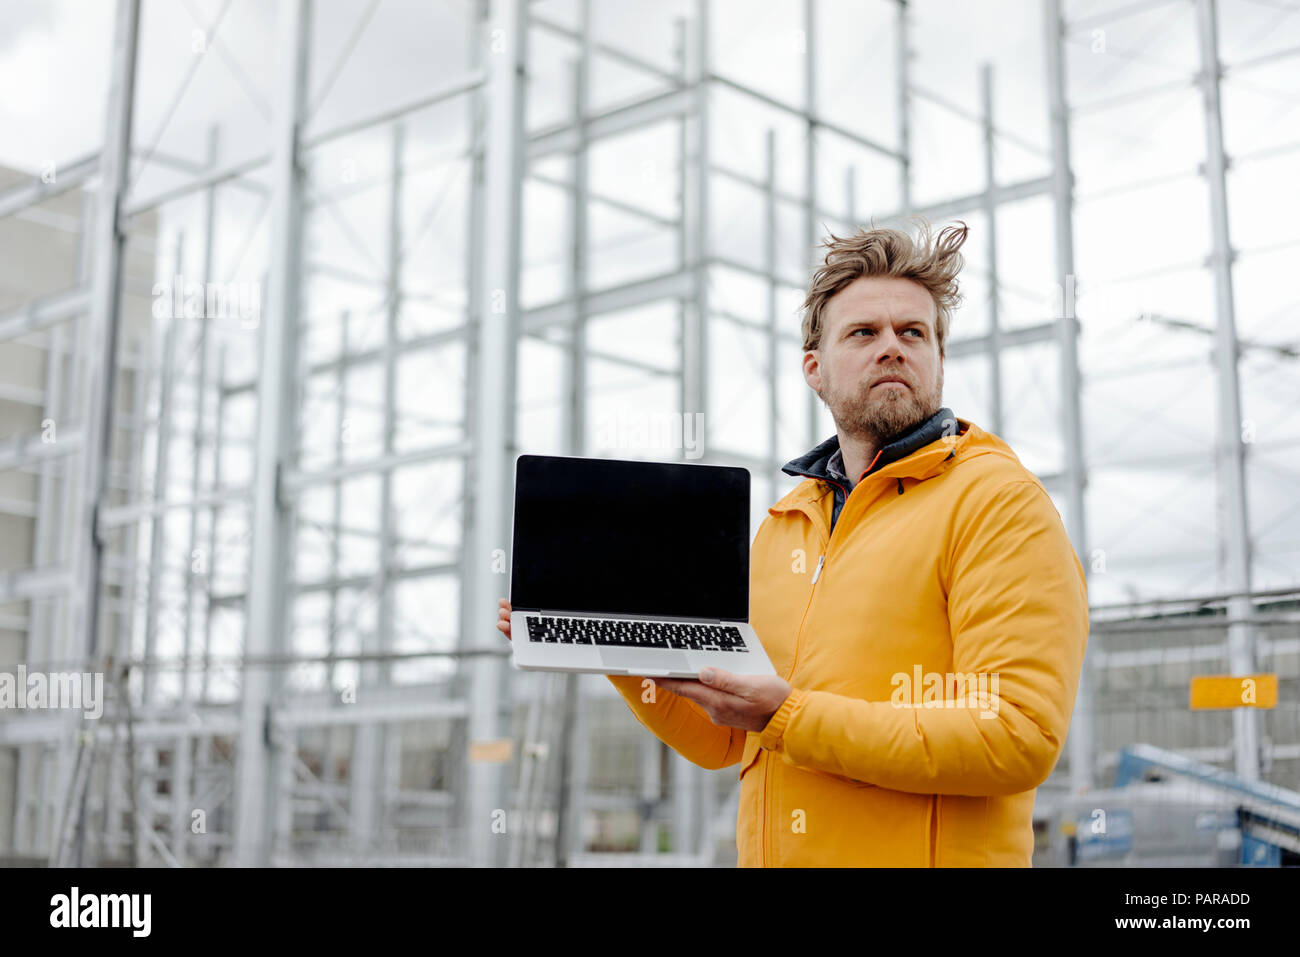 Man holding laptop, construction site in the background Stock Photo